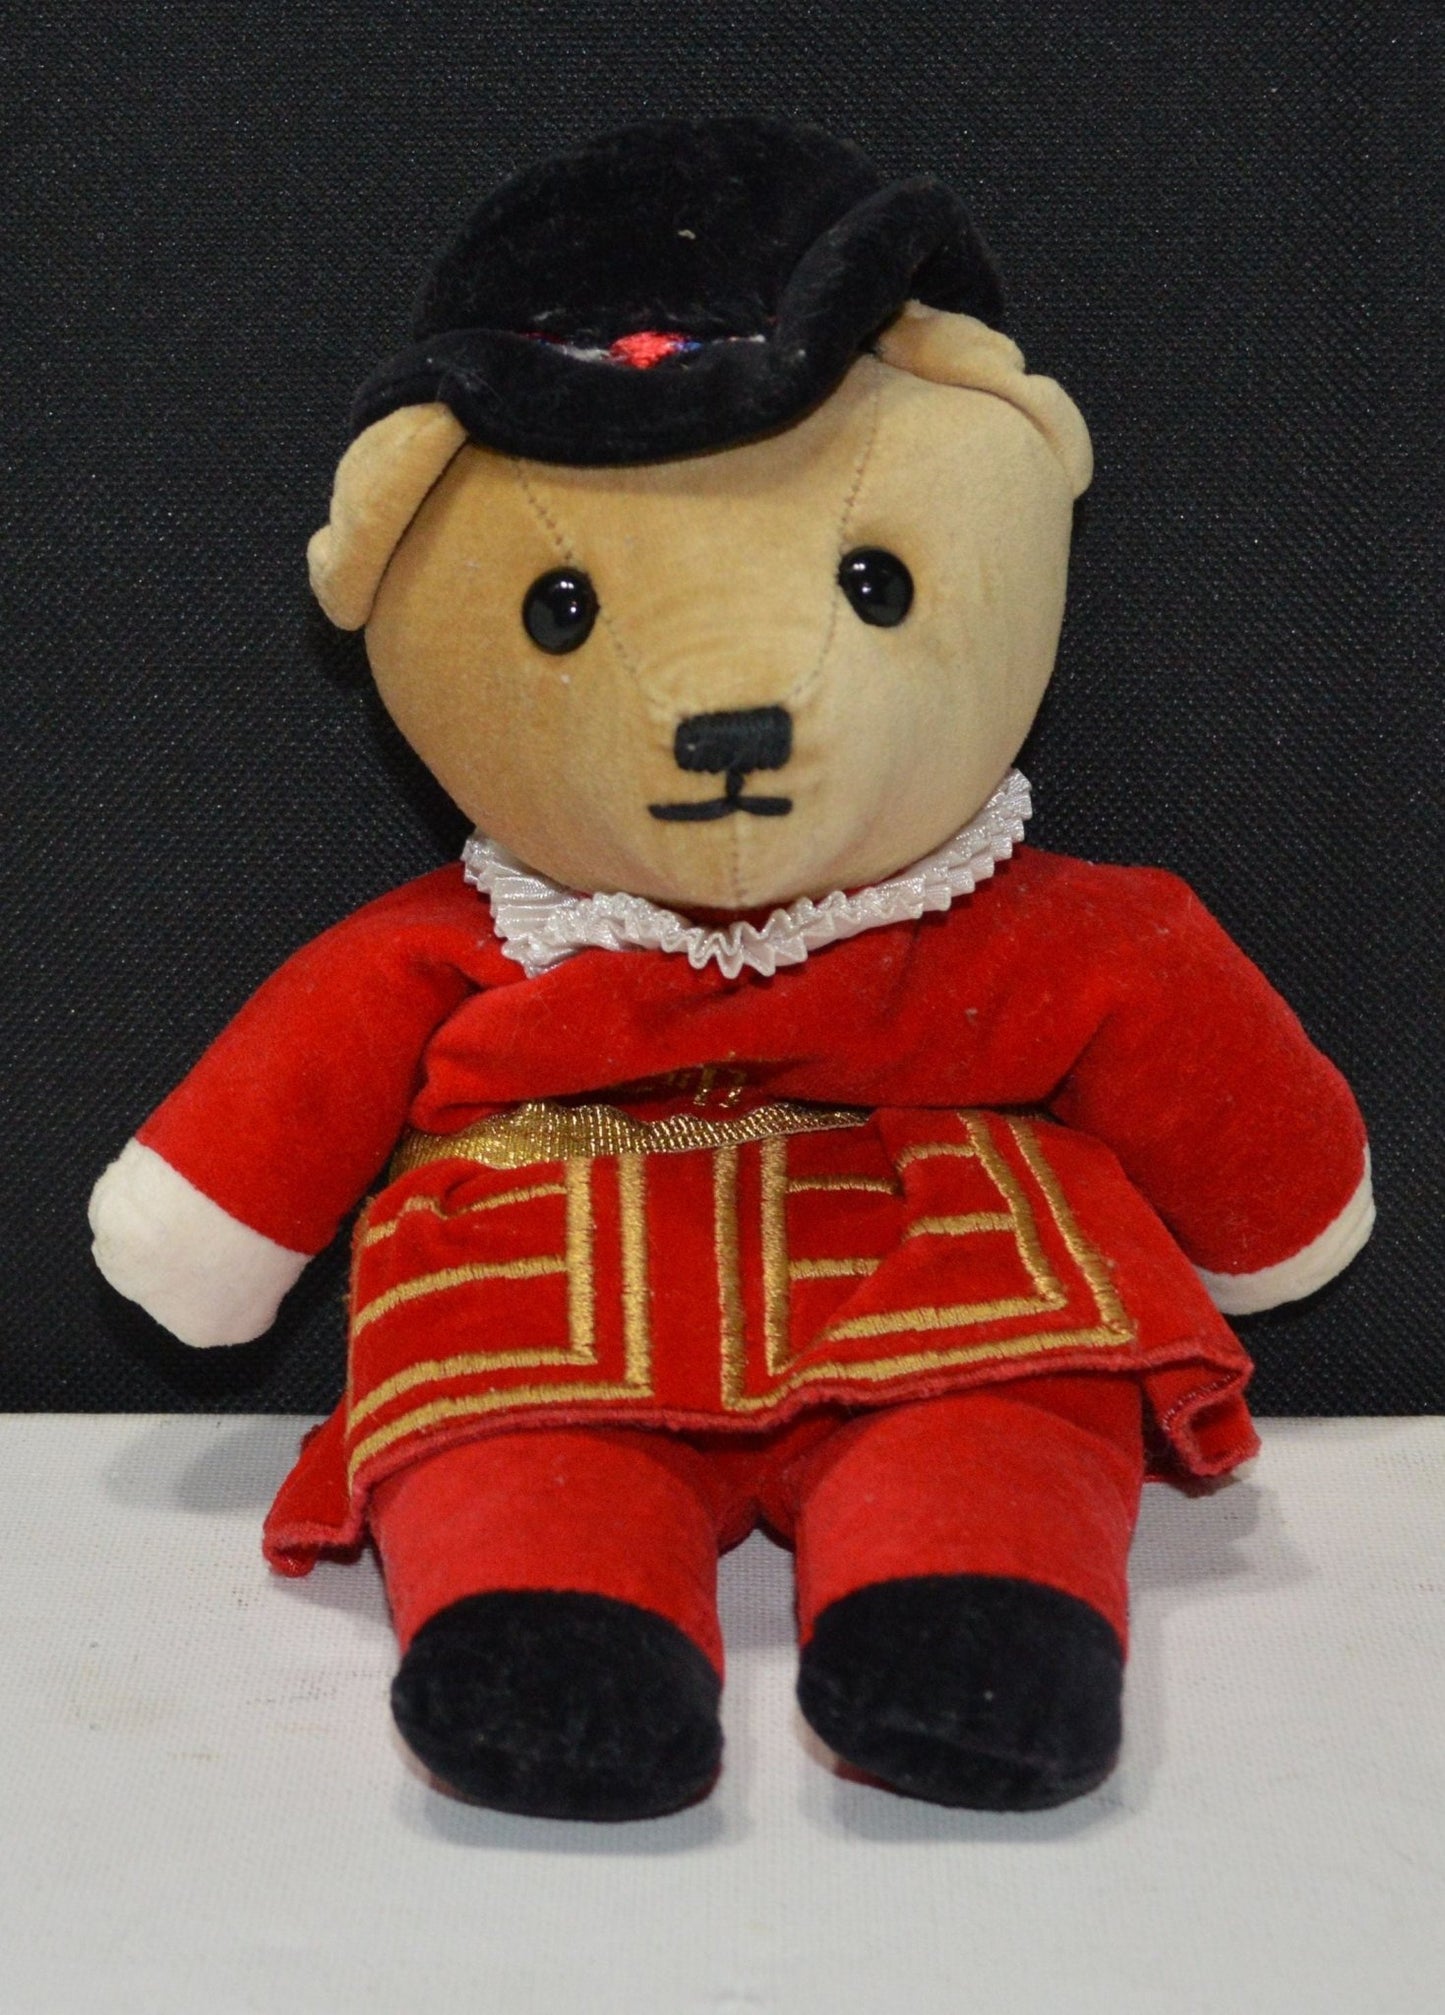 SOFT TOY BEEFEATER TEDDY BEAR( PREVIOUSLY OWNED) GOOD CONDITION - TMD167207